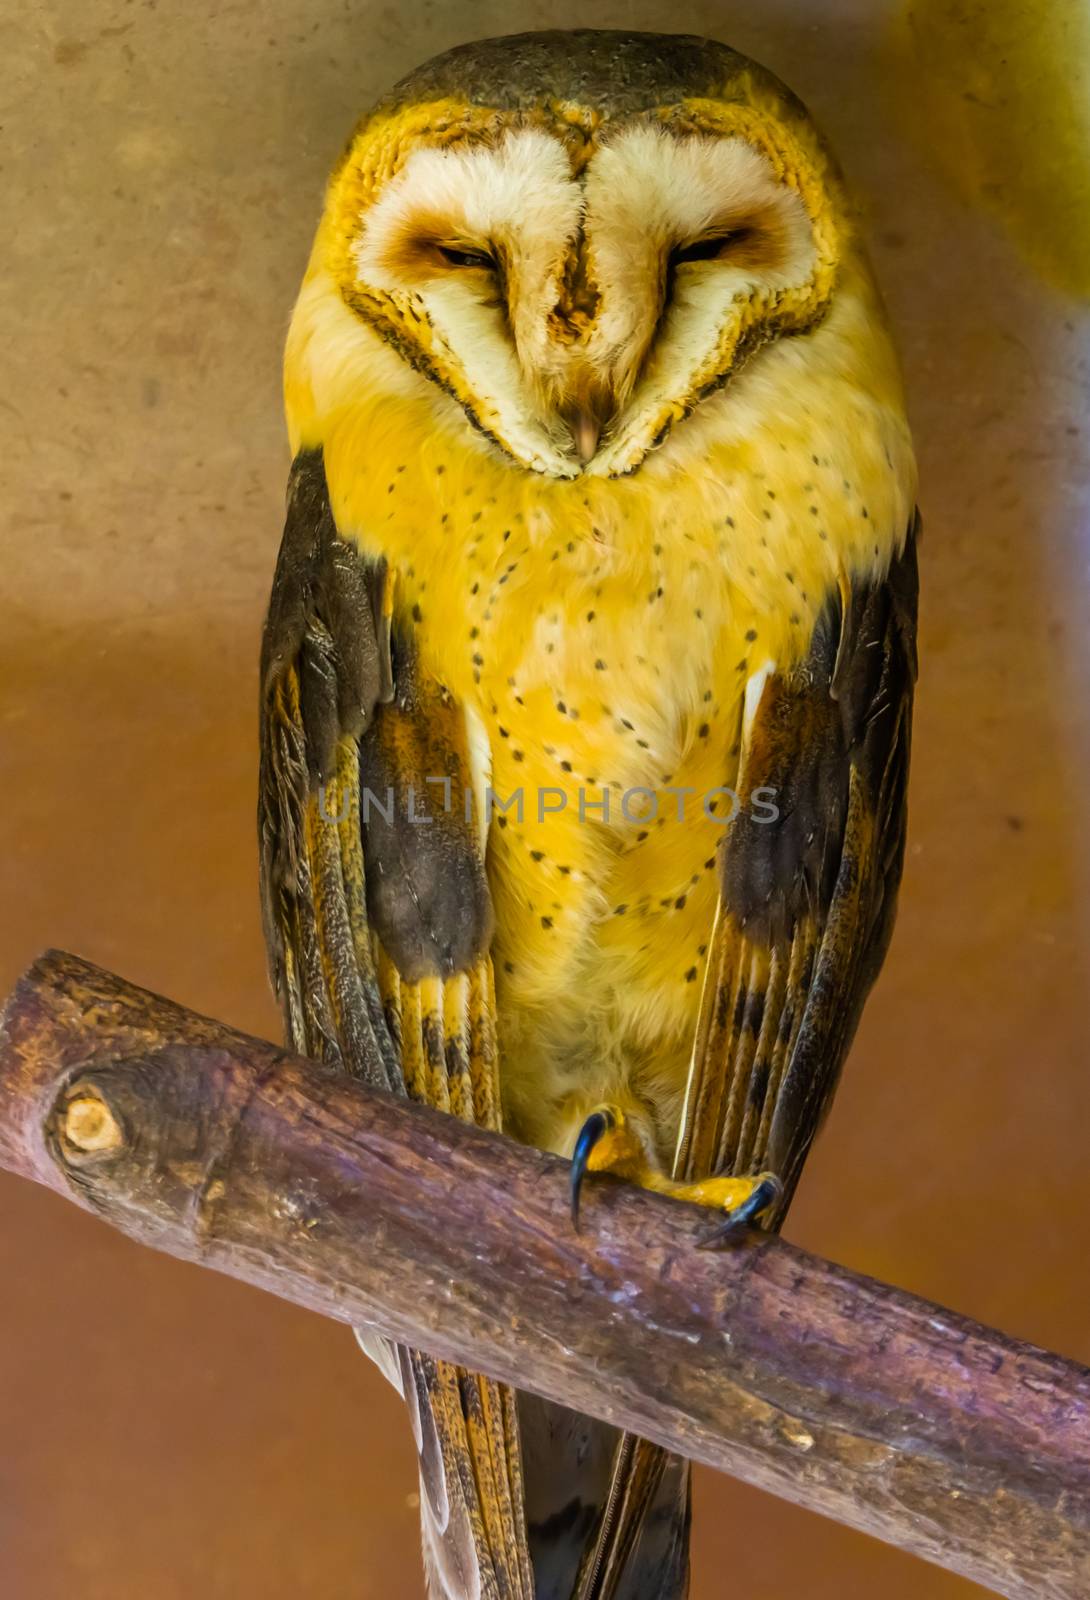 beautiful portrait of a common barn owl, bird specie from the Netherlands